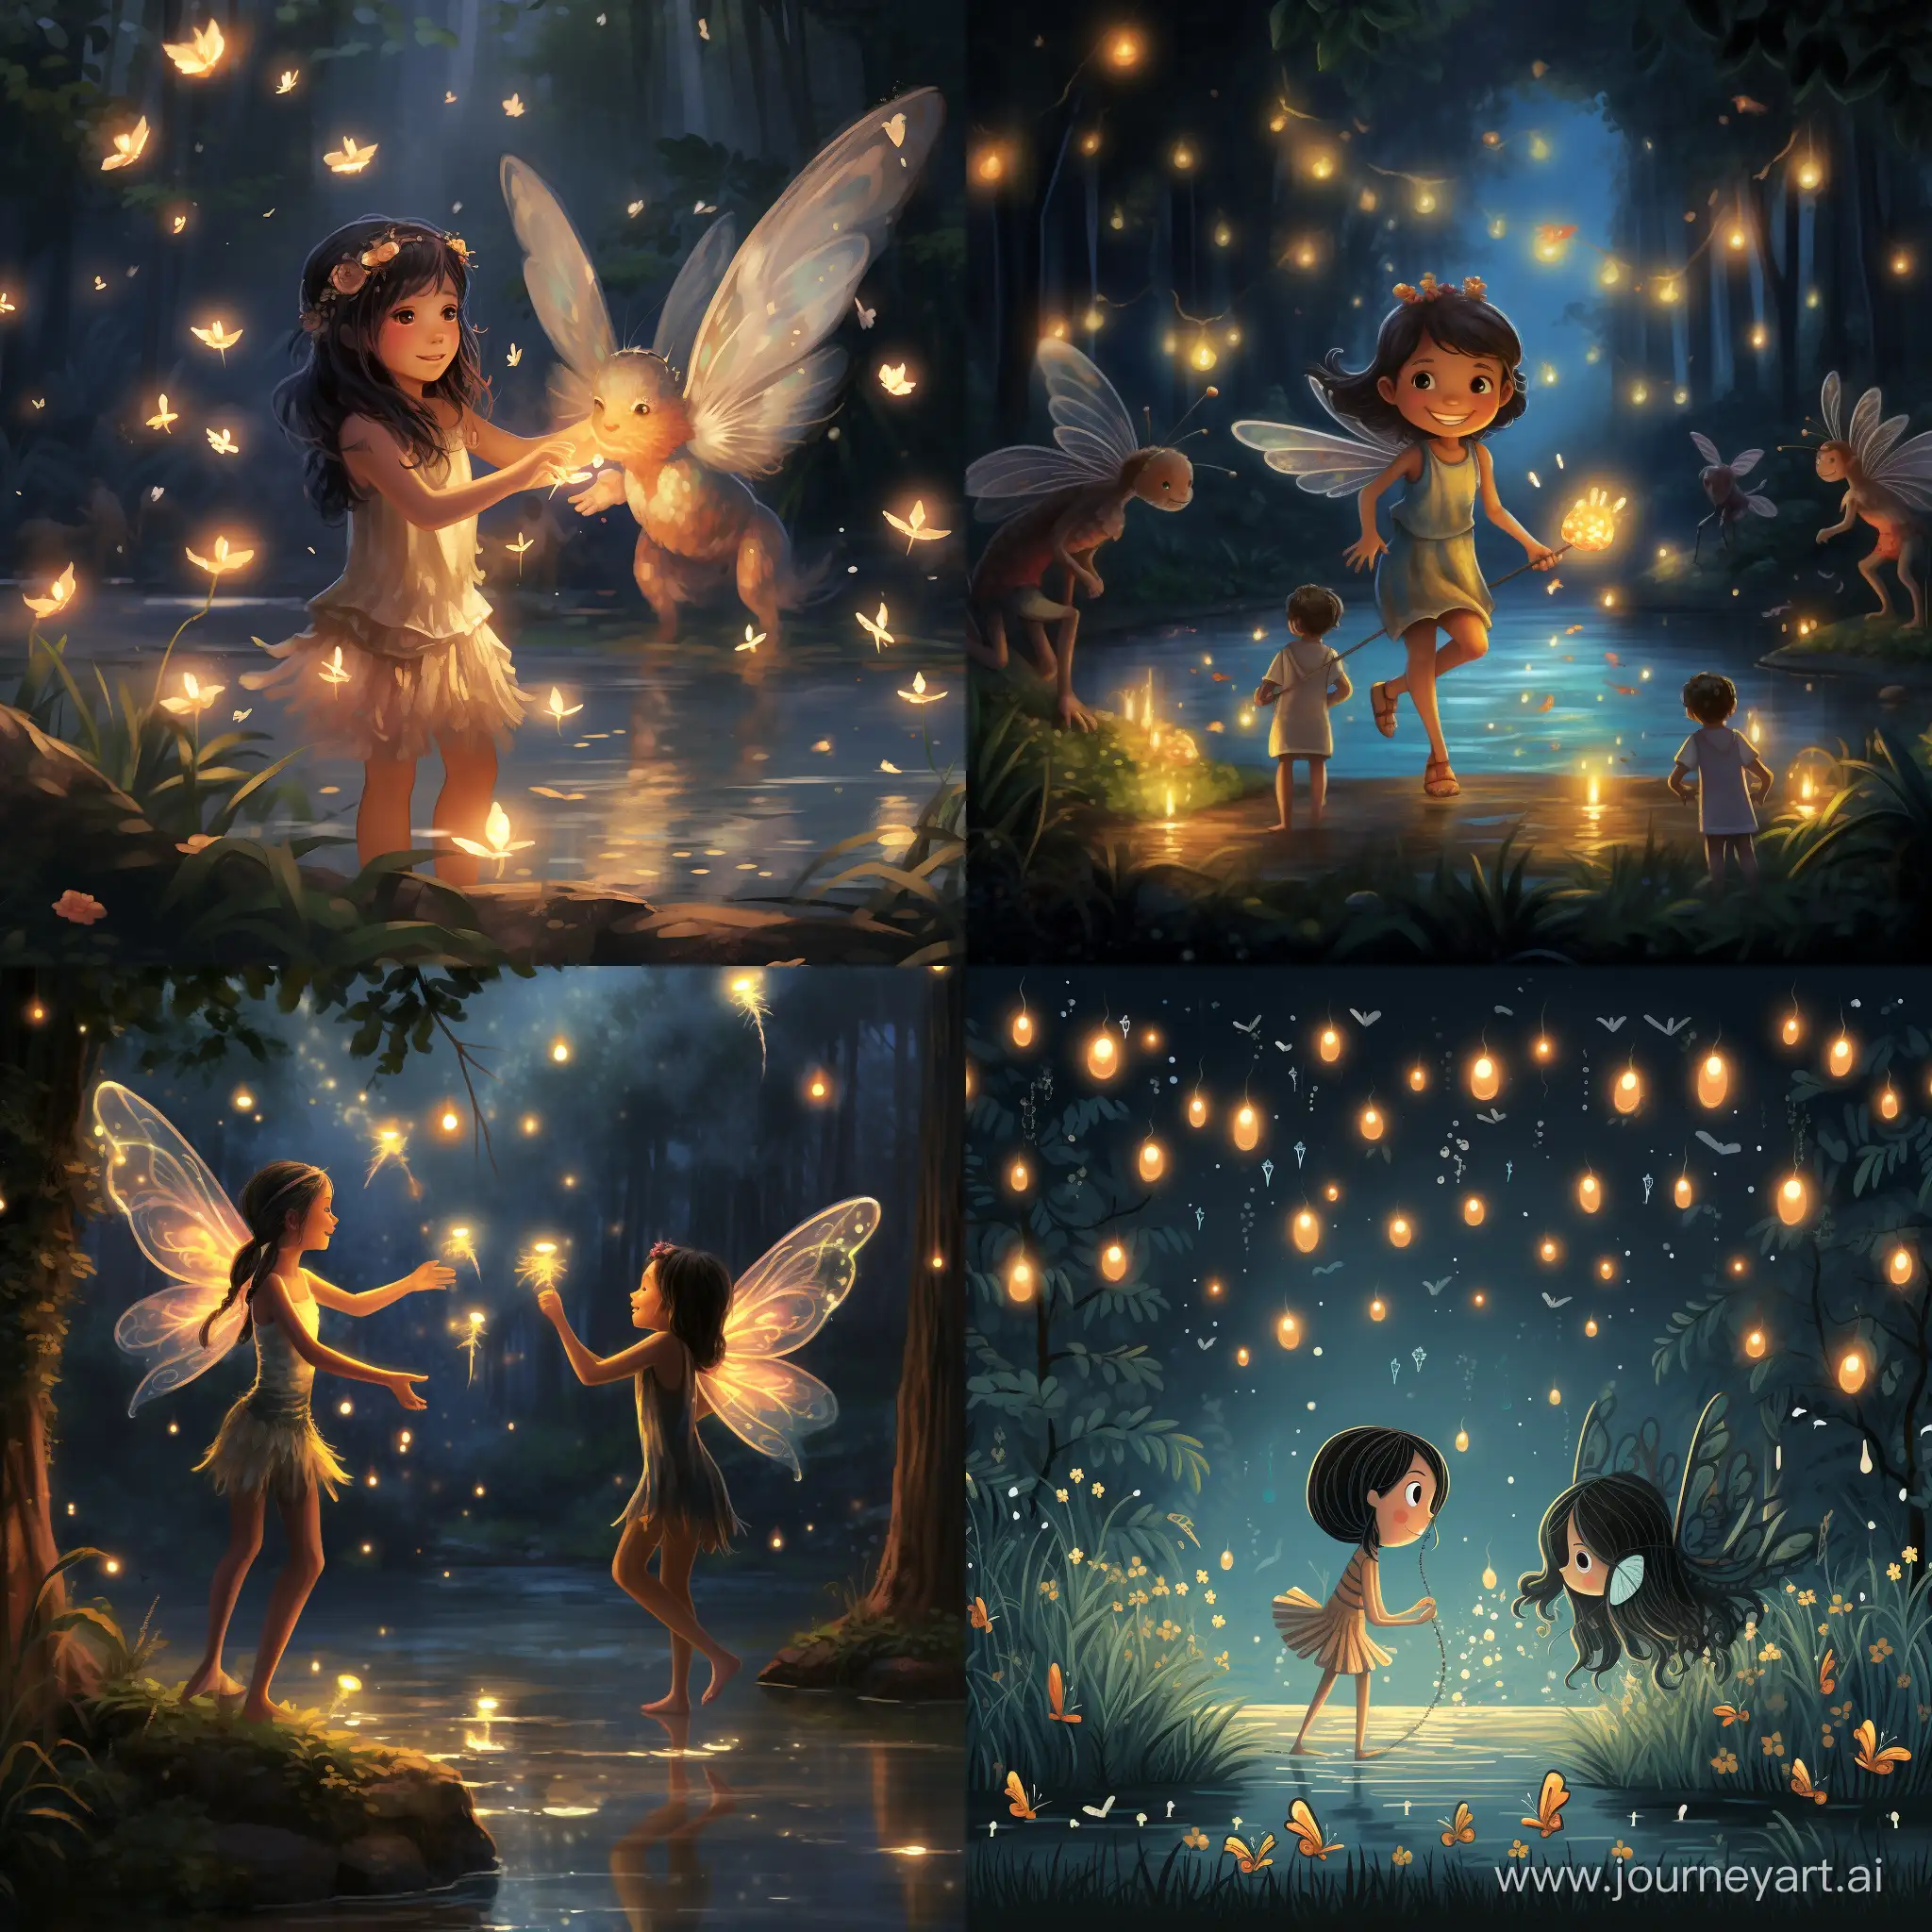 Illustration: Sparkle following the twinkling fireflies, with various magical creatures like playful fairies and friendly fireflies in the background.